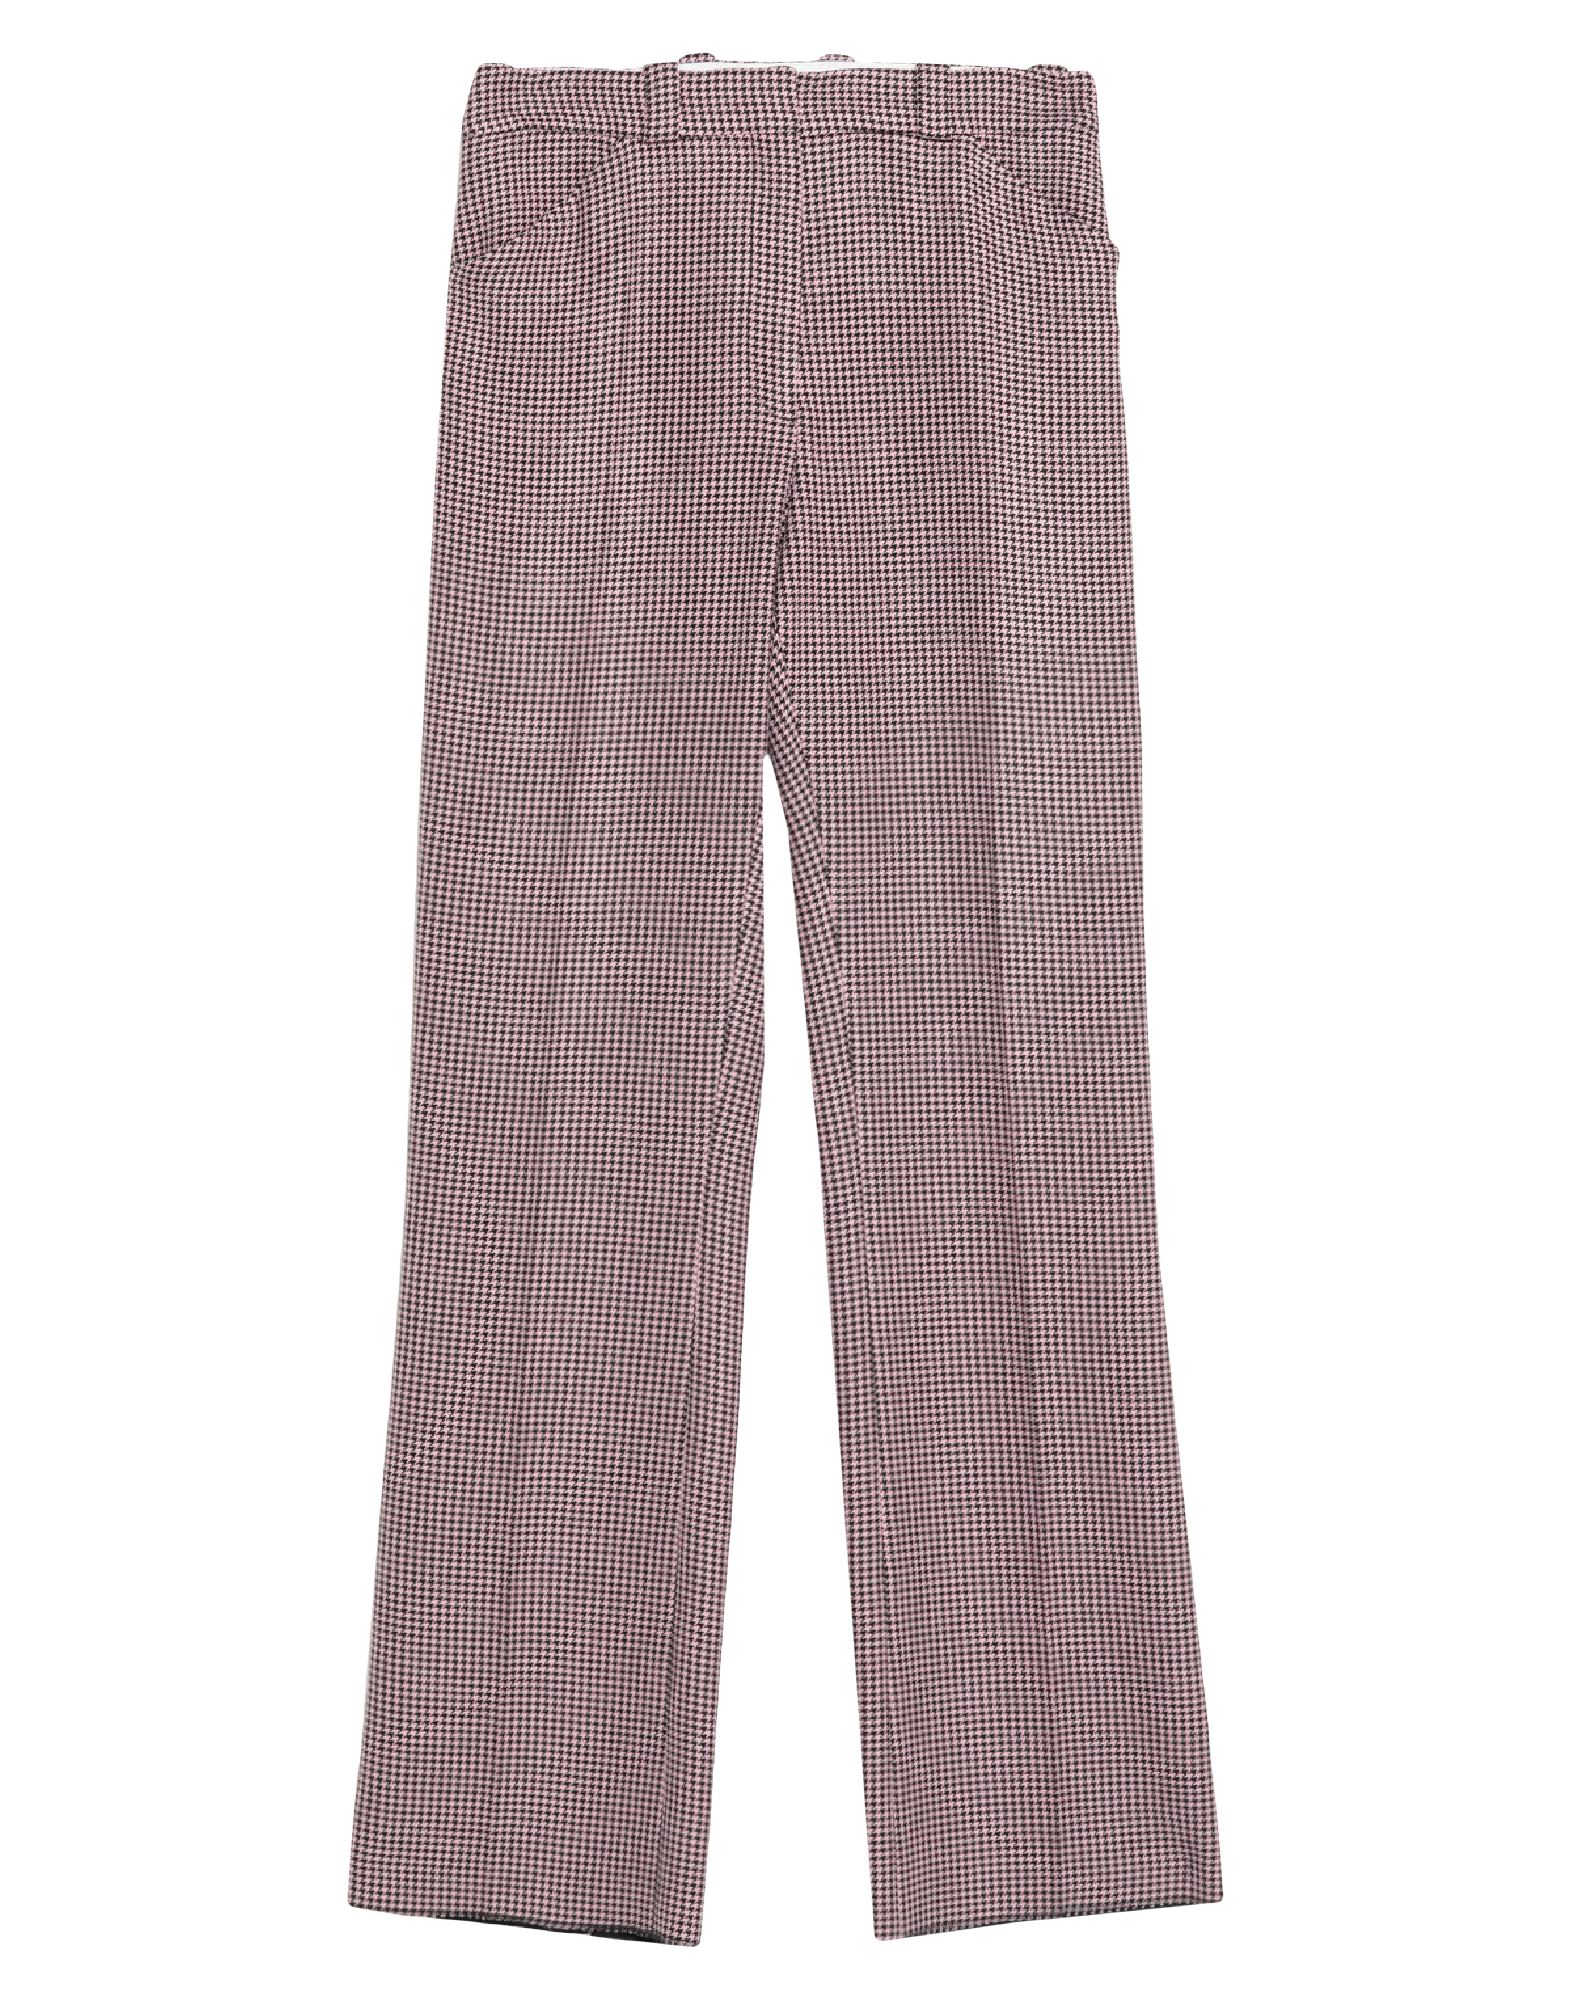 Mulberry Pants In Pink